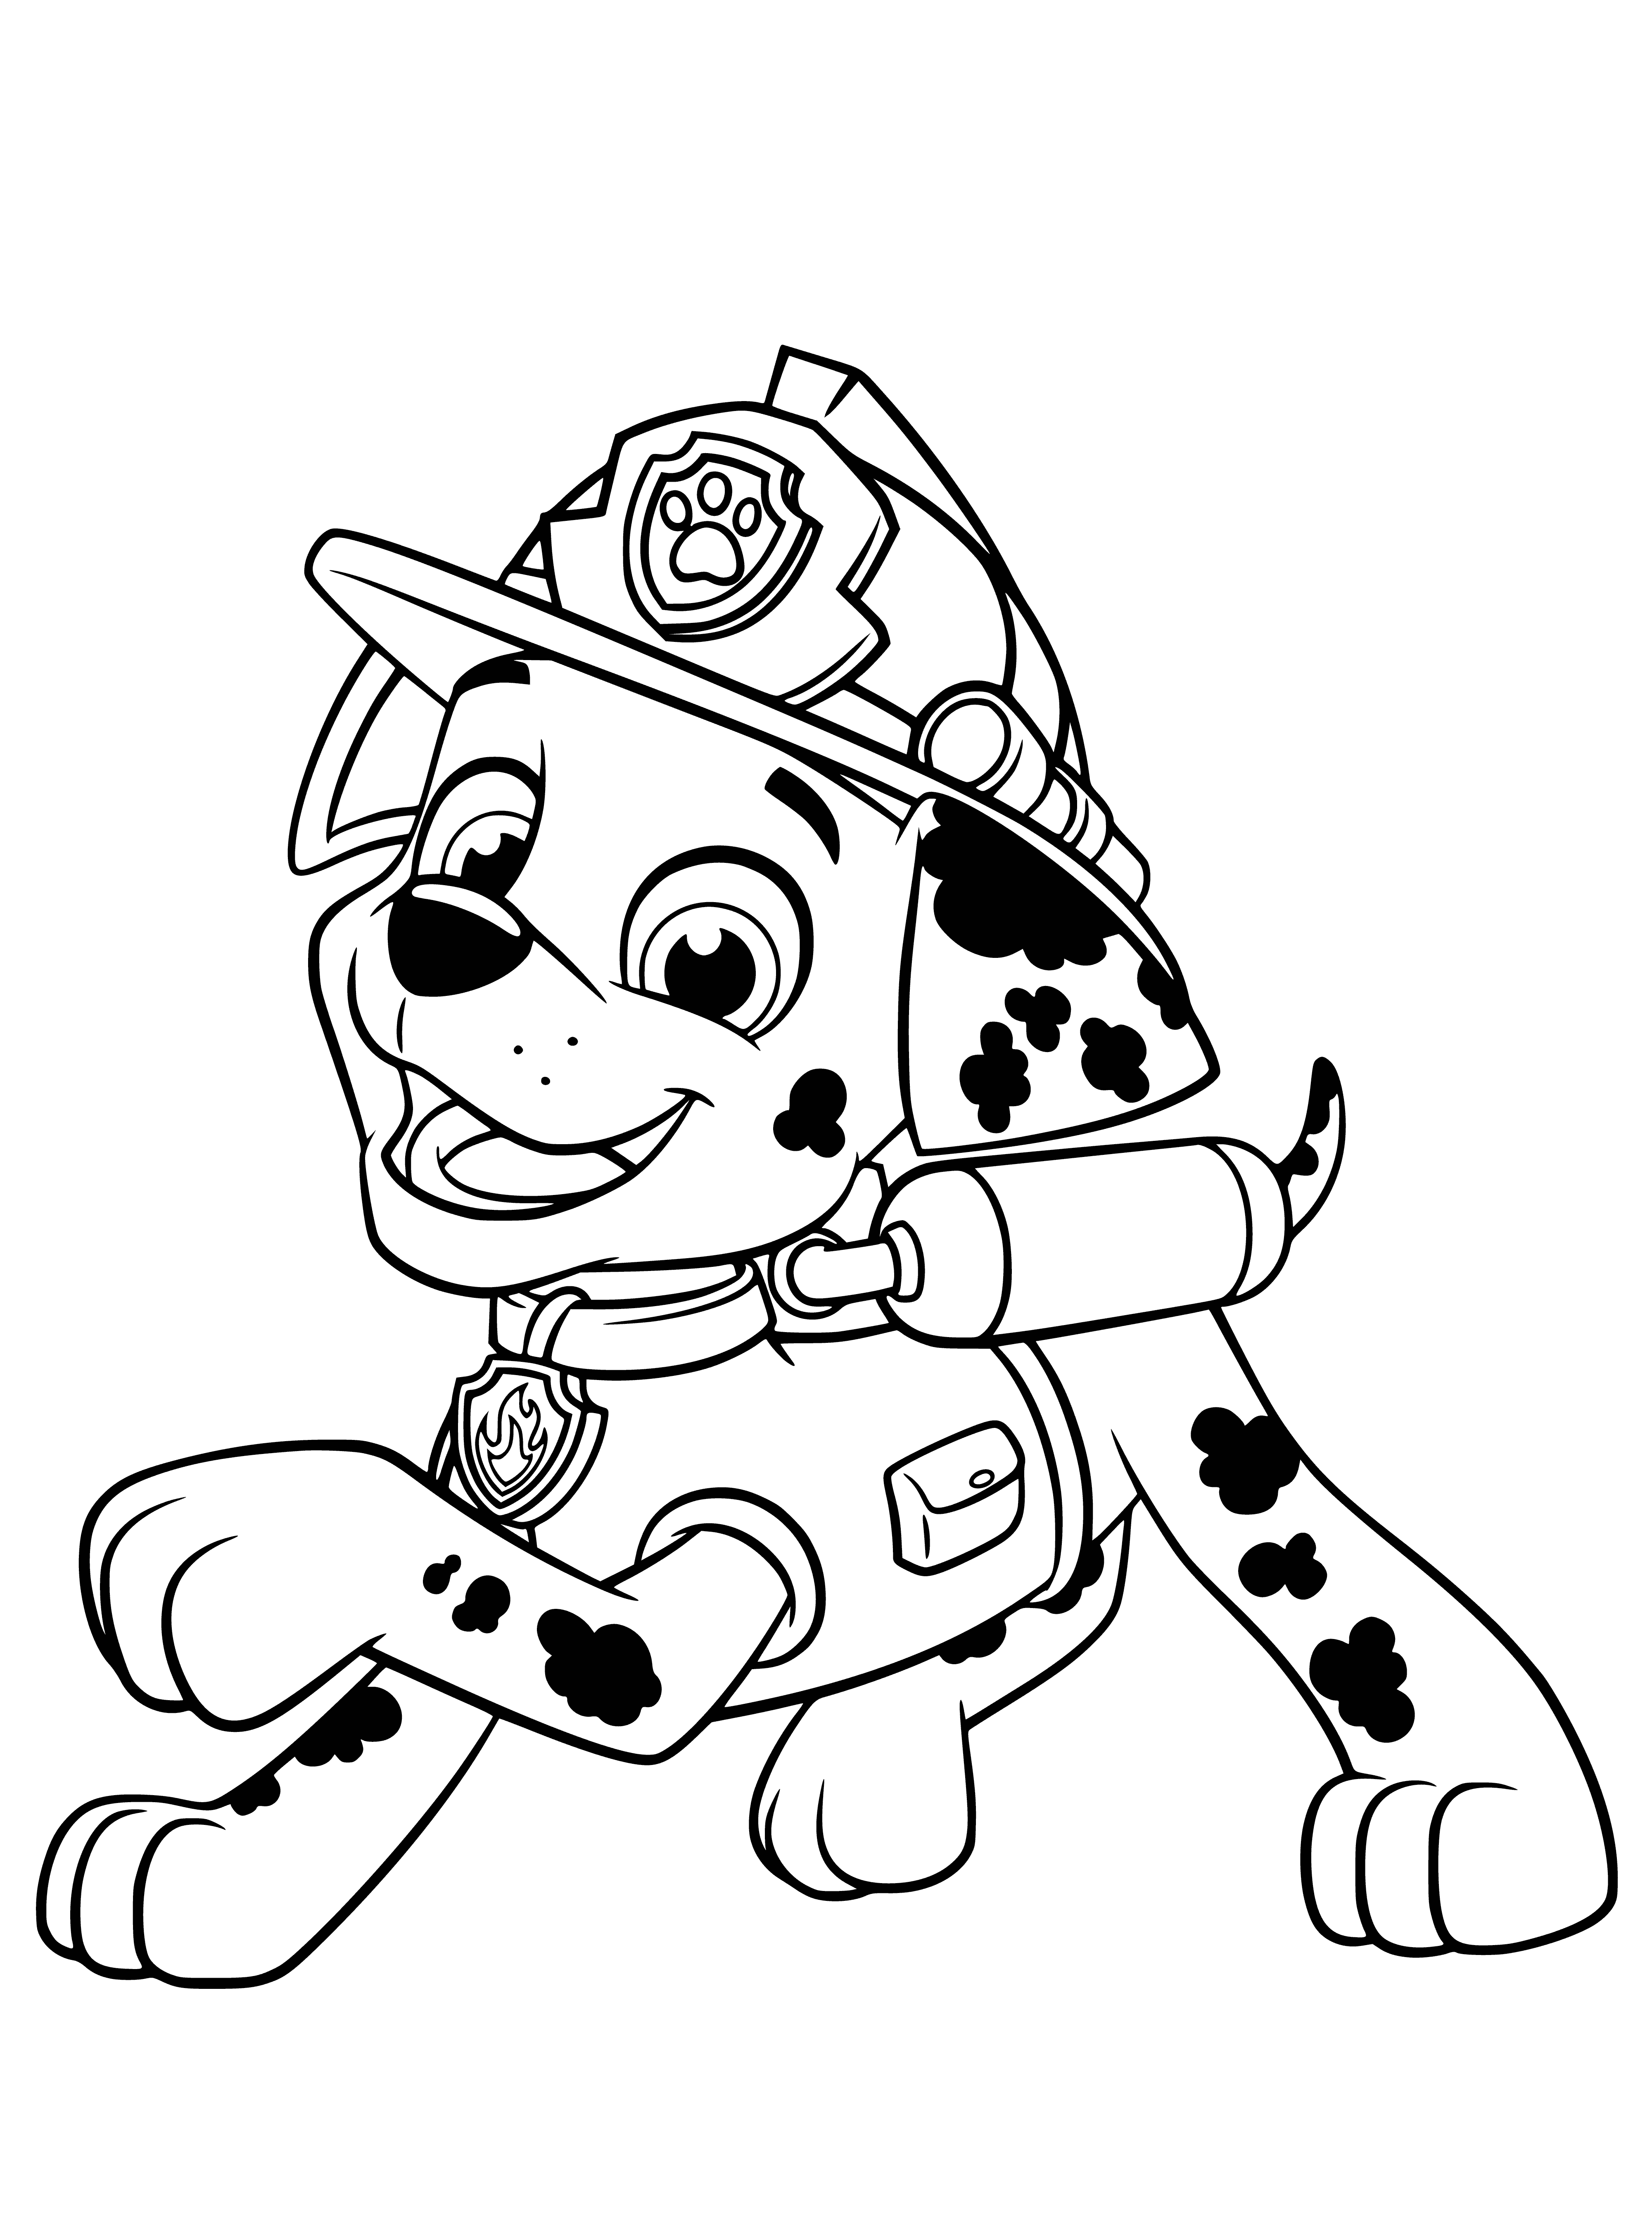 coloring page: Marshal is PAW Patrol's fire pup; voiced by Chase, he's a Dalmatian puppy.